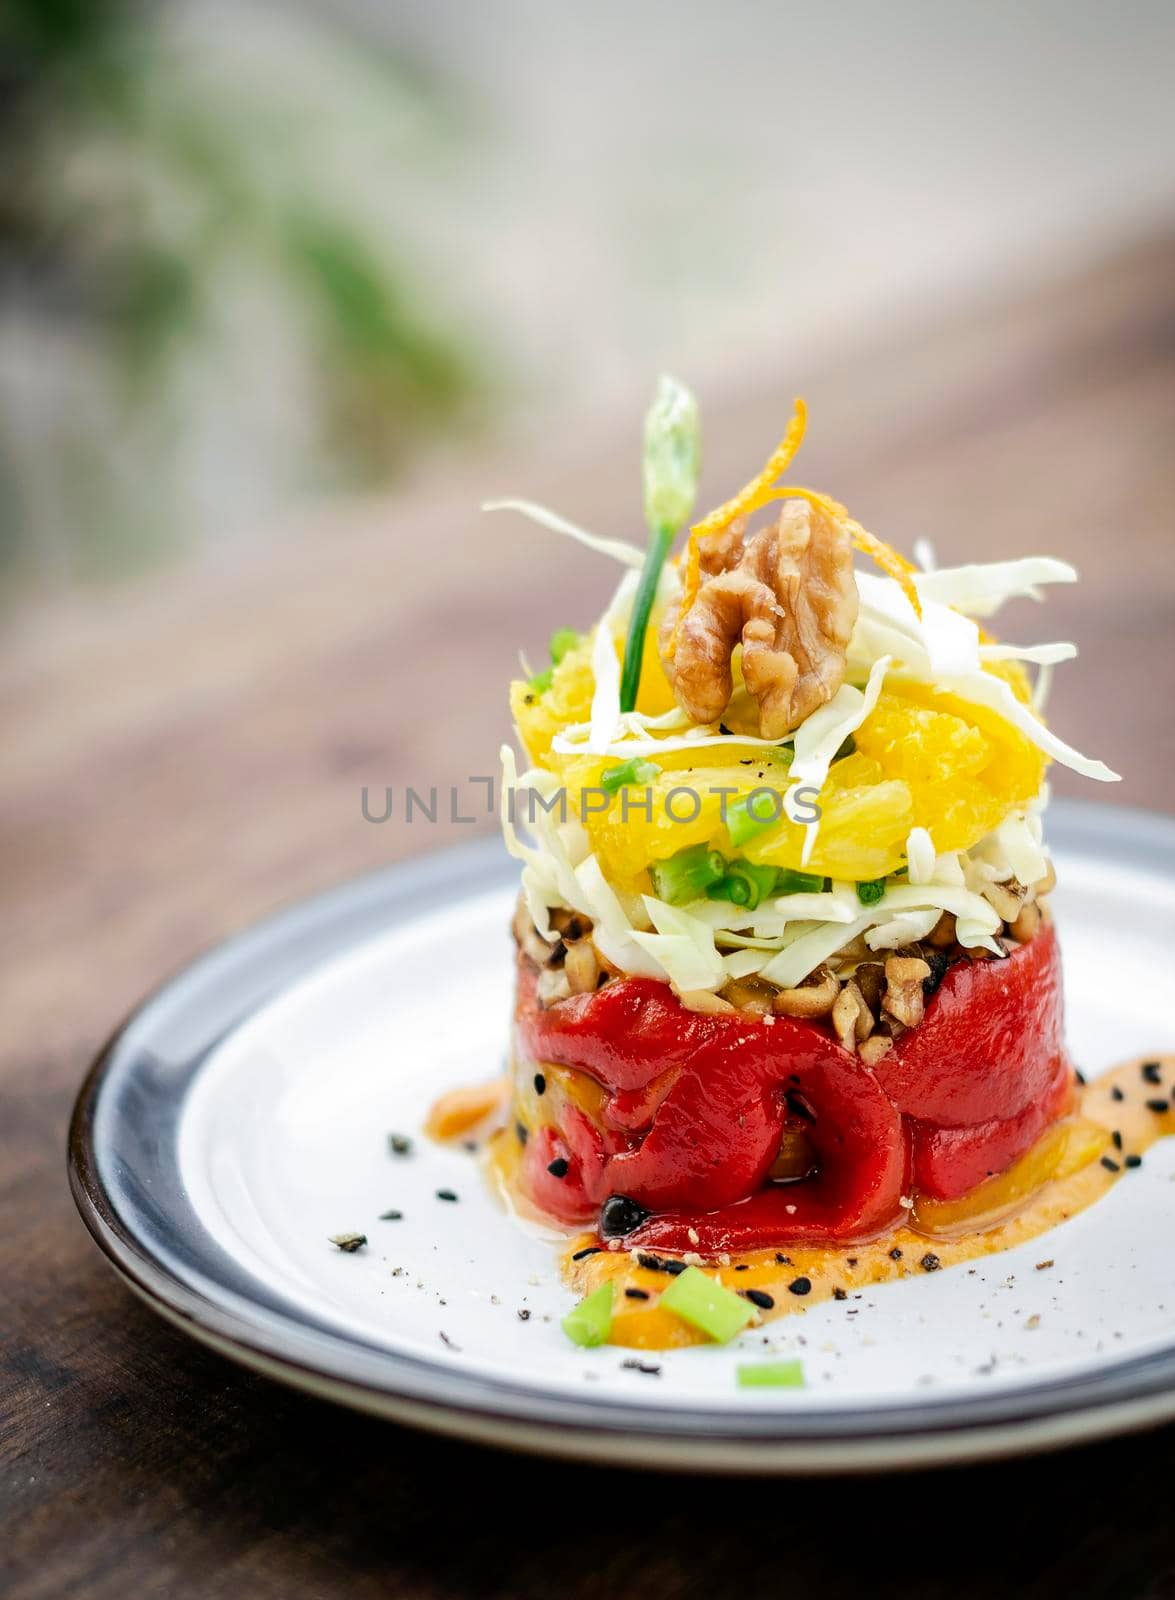 roasted red pepper with orange quinoa and walnut vegan tapas by jackmalipan